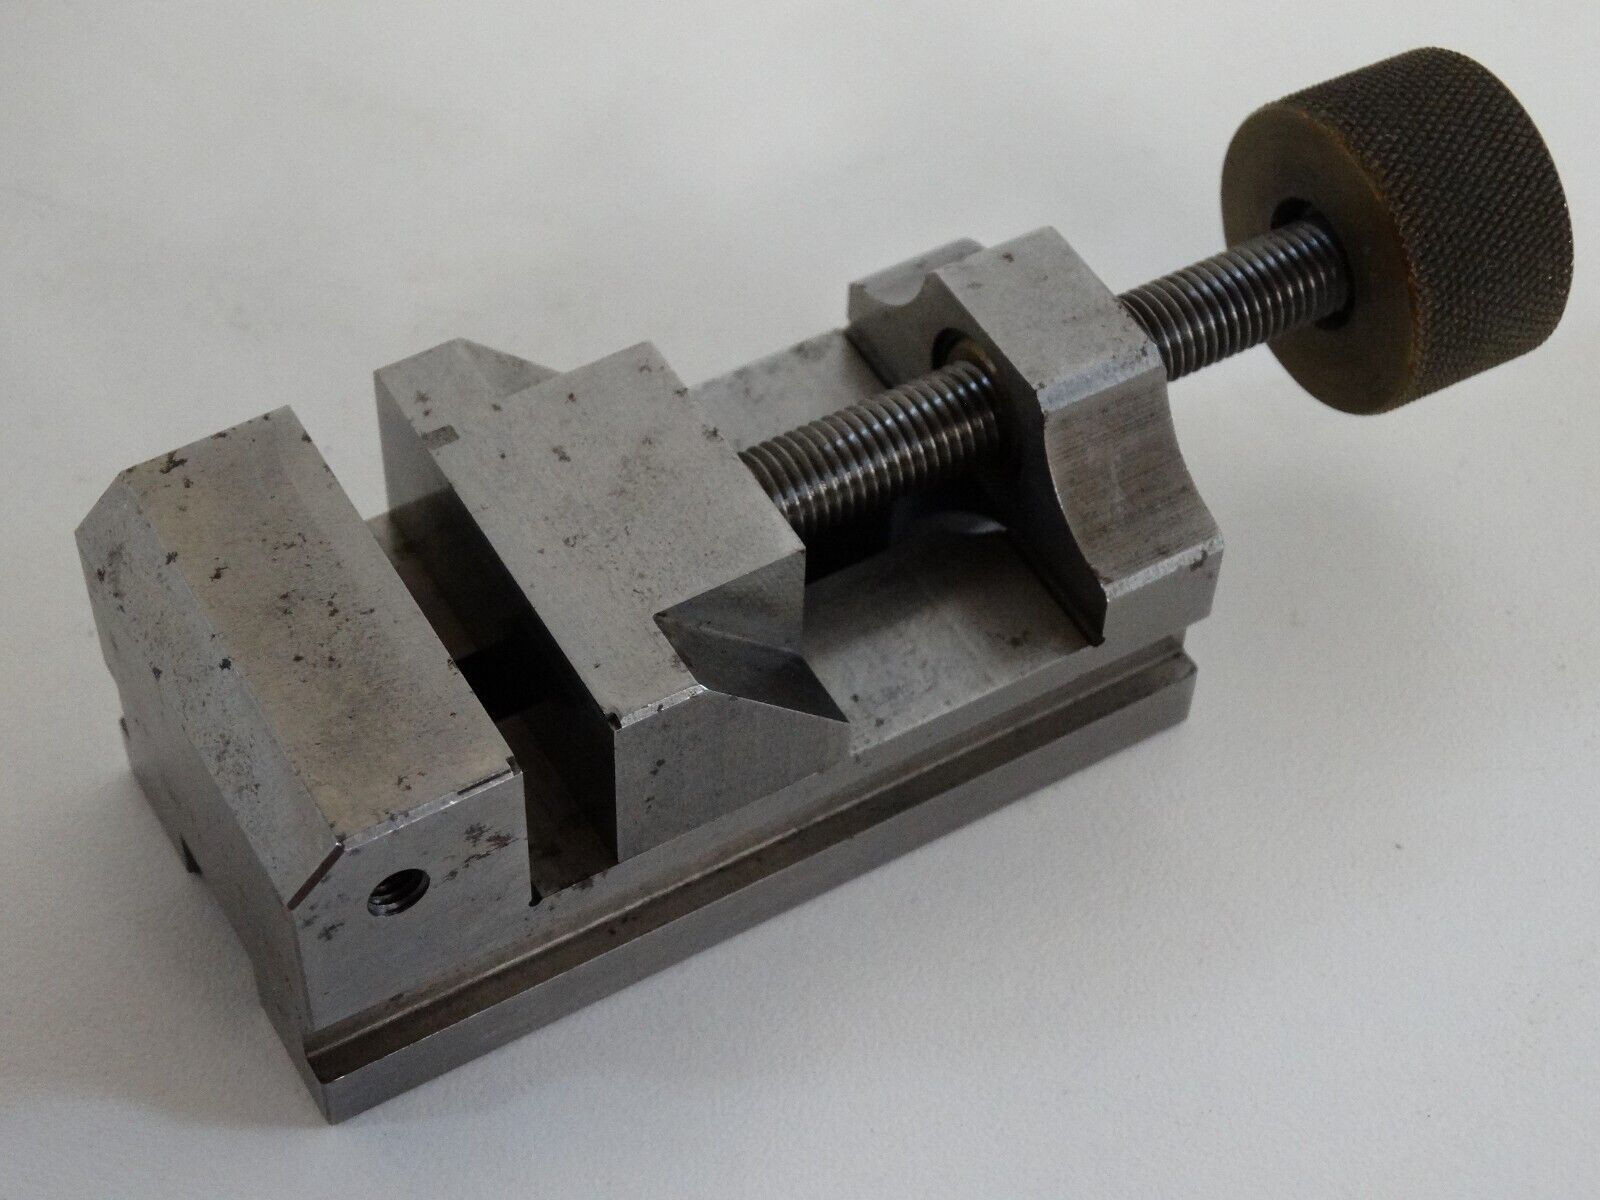 toolmaker made machinist grinding screw vise 3 x 1 5/16 x 1 7/16 opens 1 1/8 in.